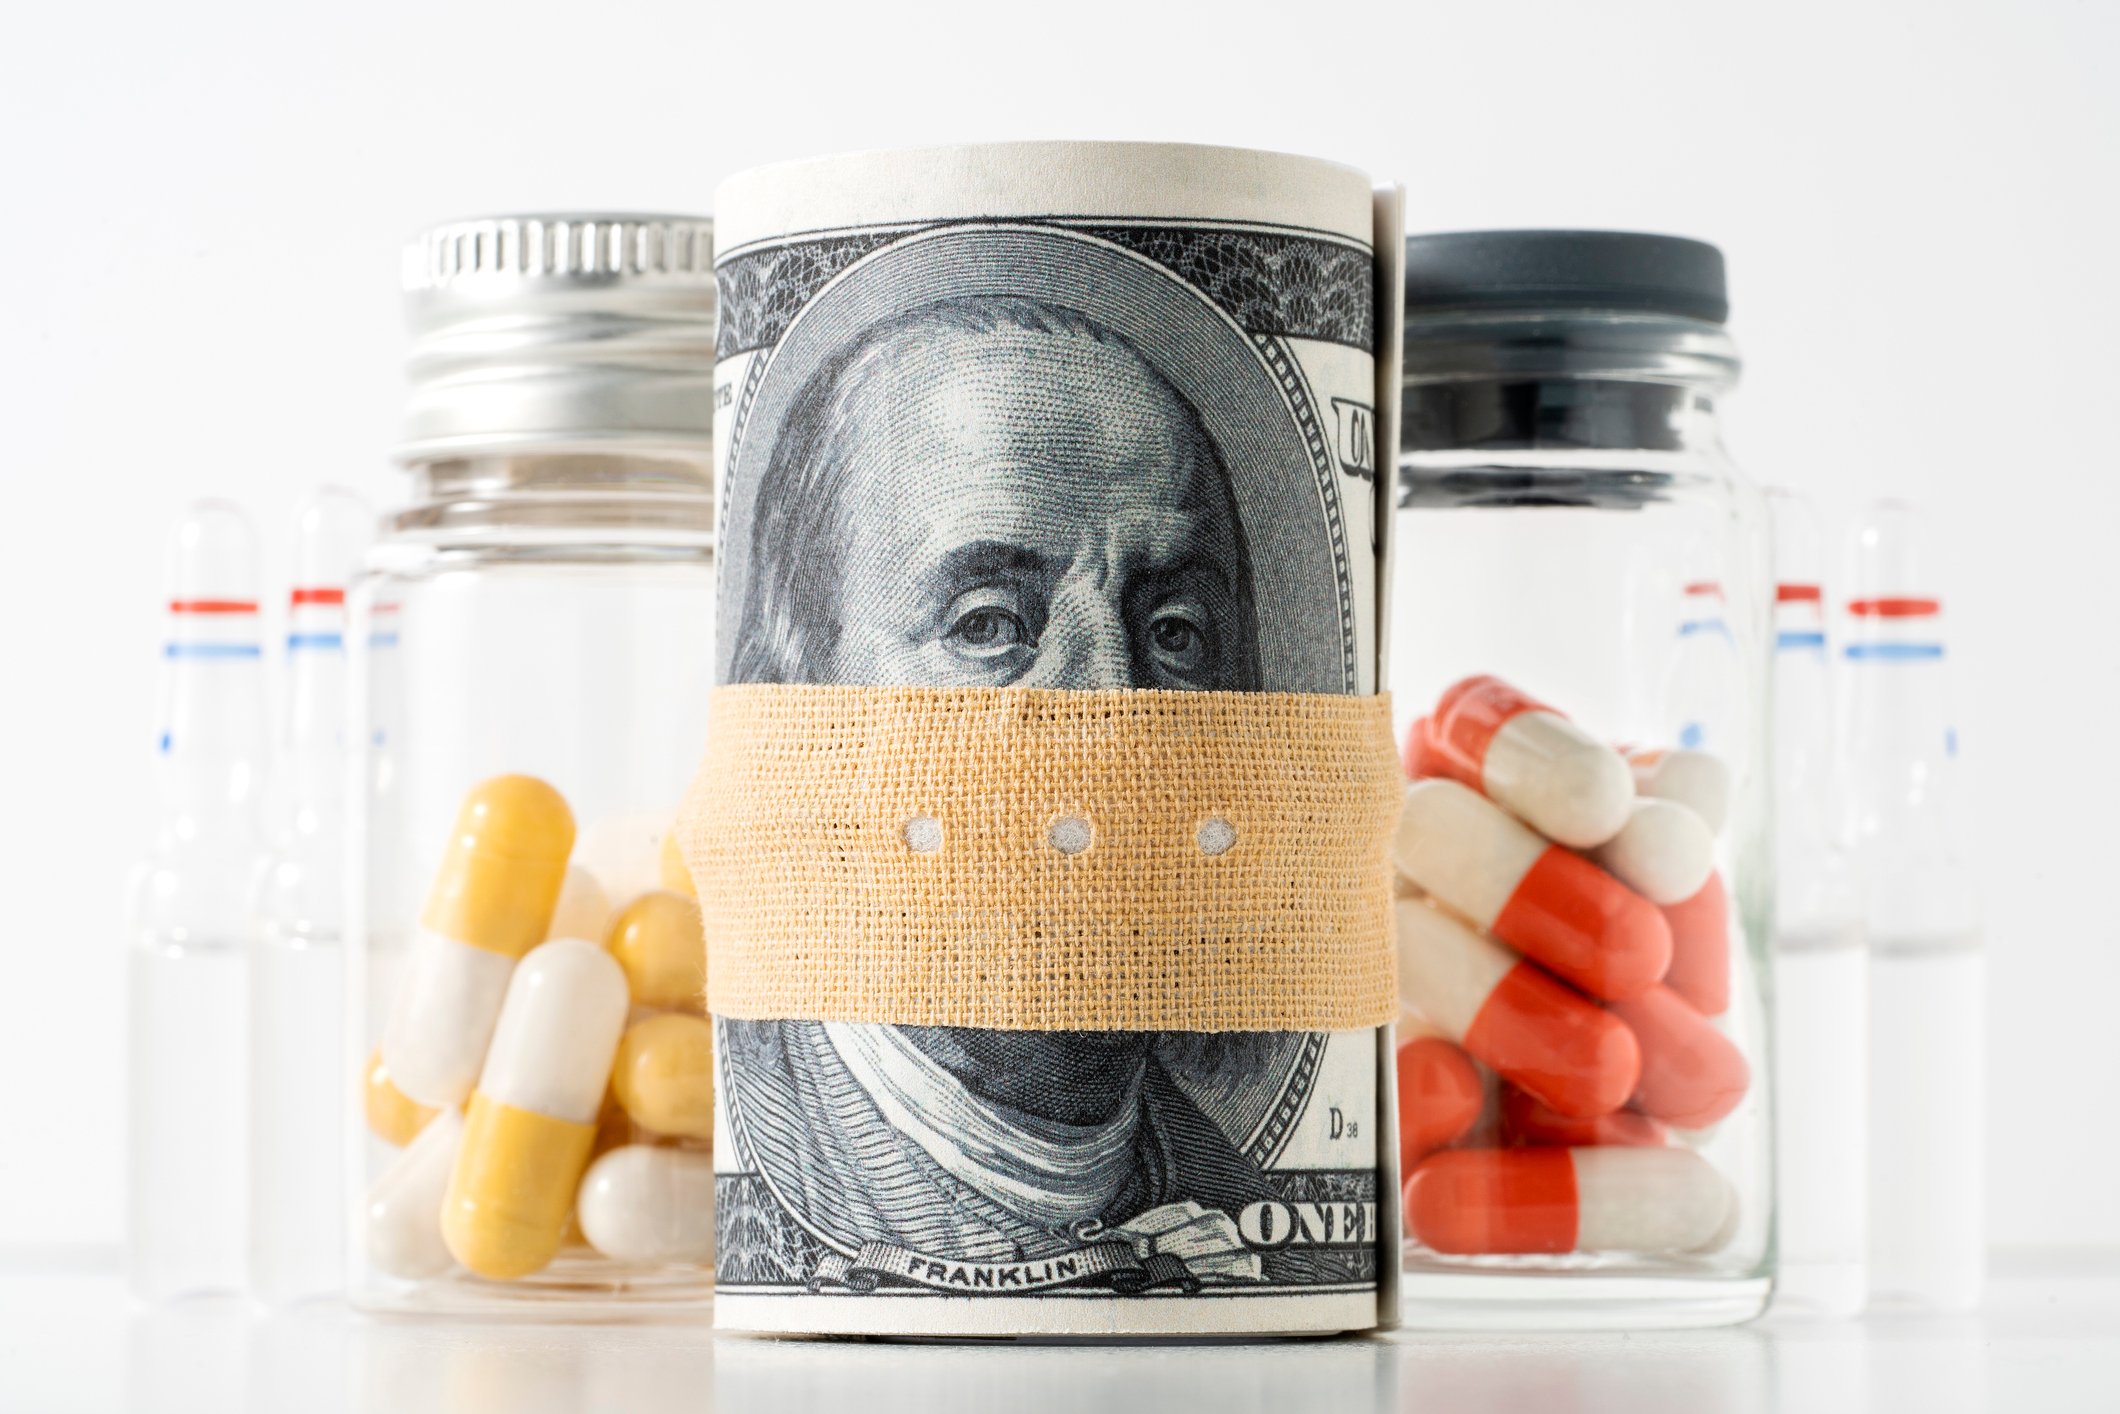 Pharmaceutical industry rips 'draconian' price negotiation provision